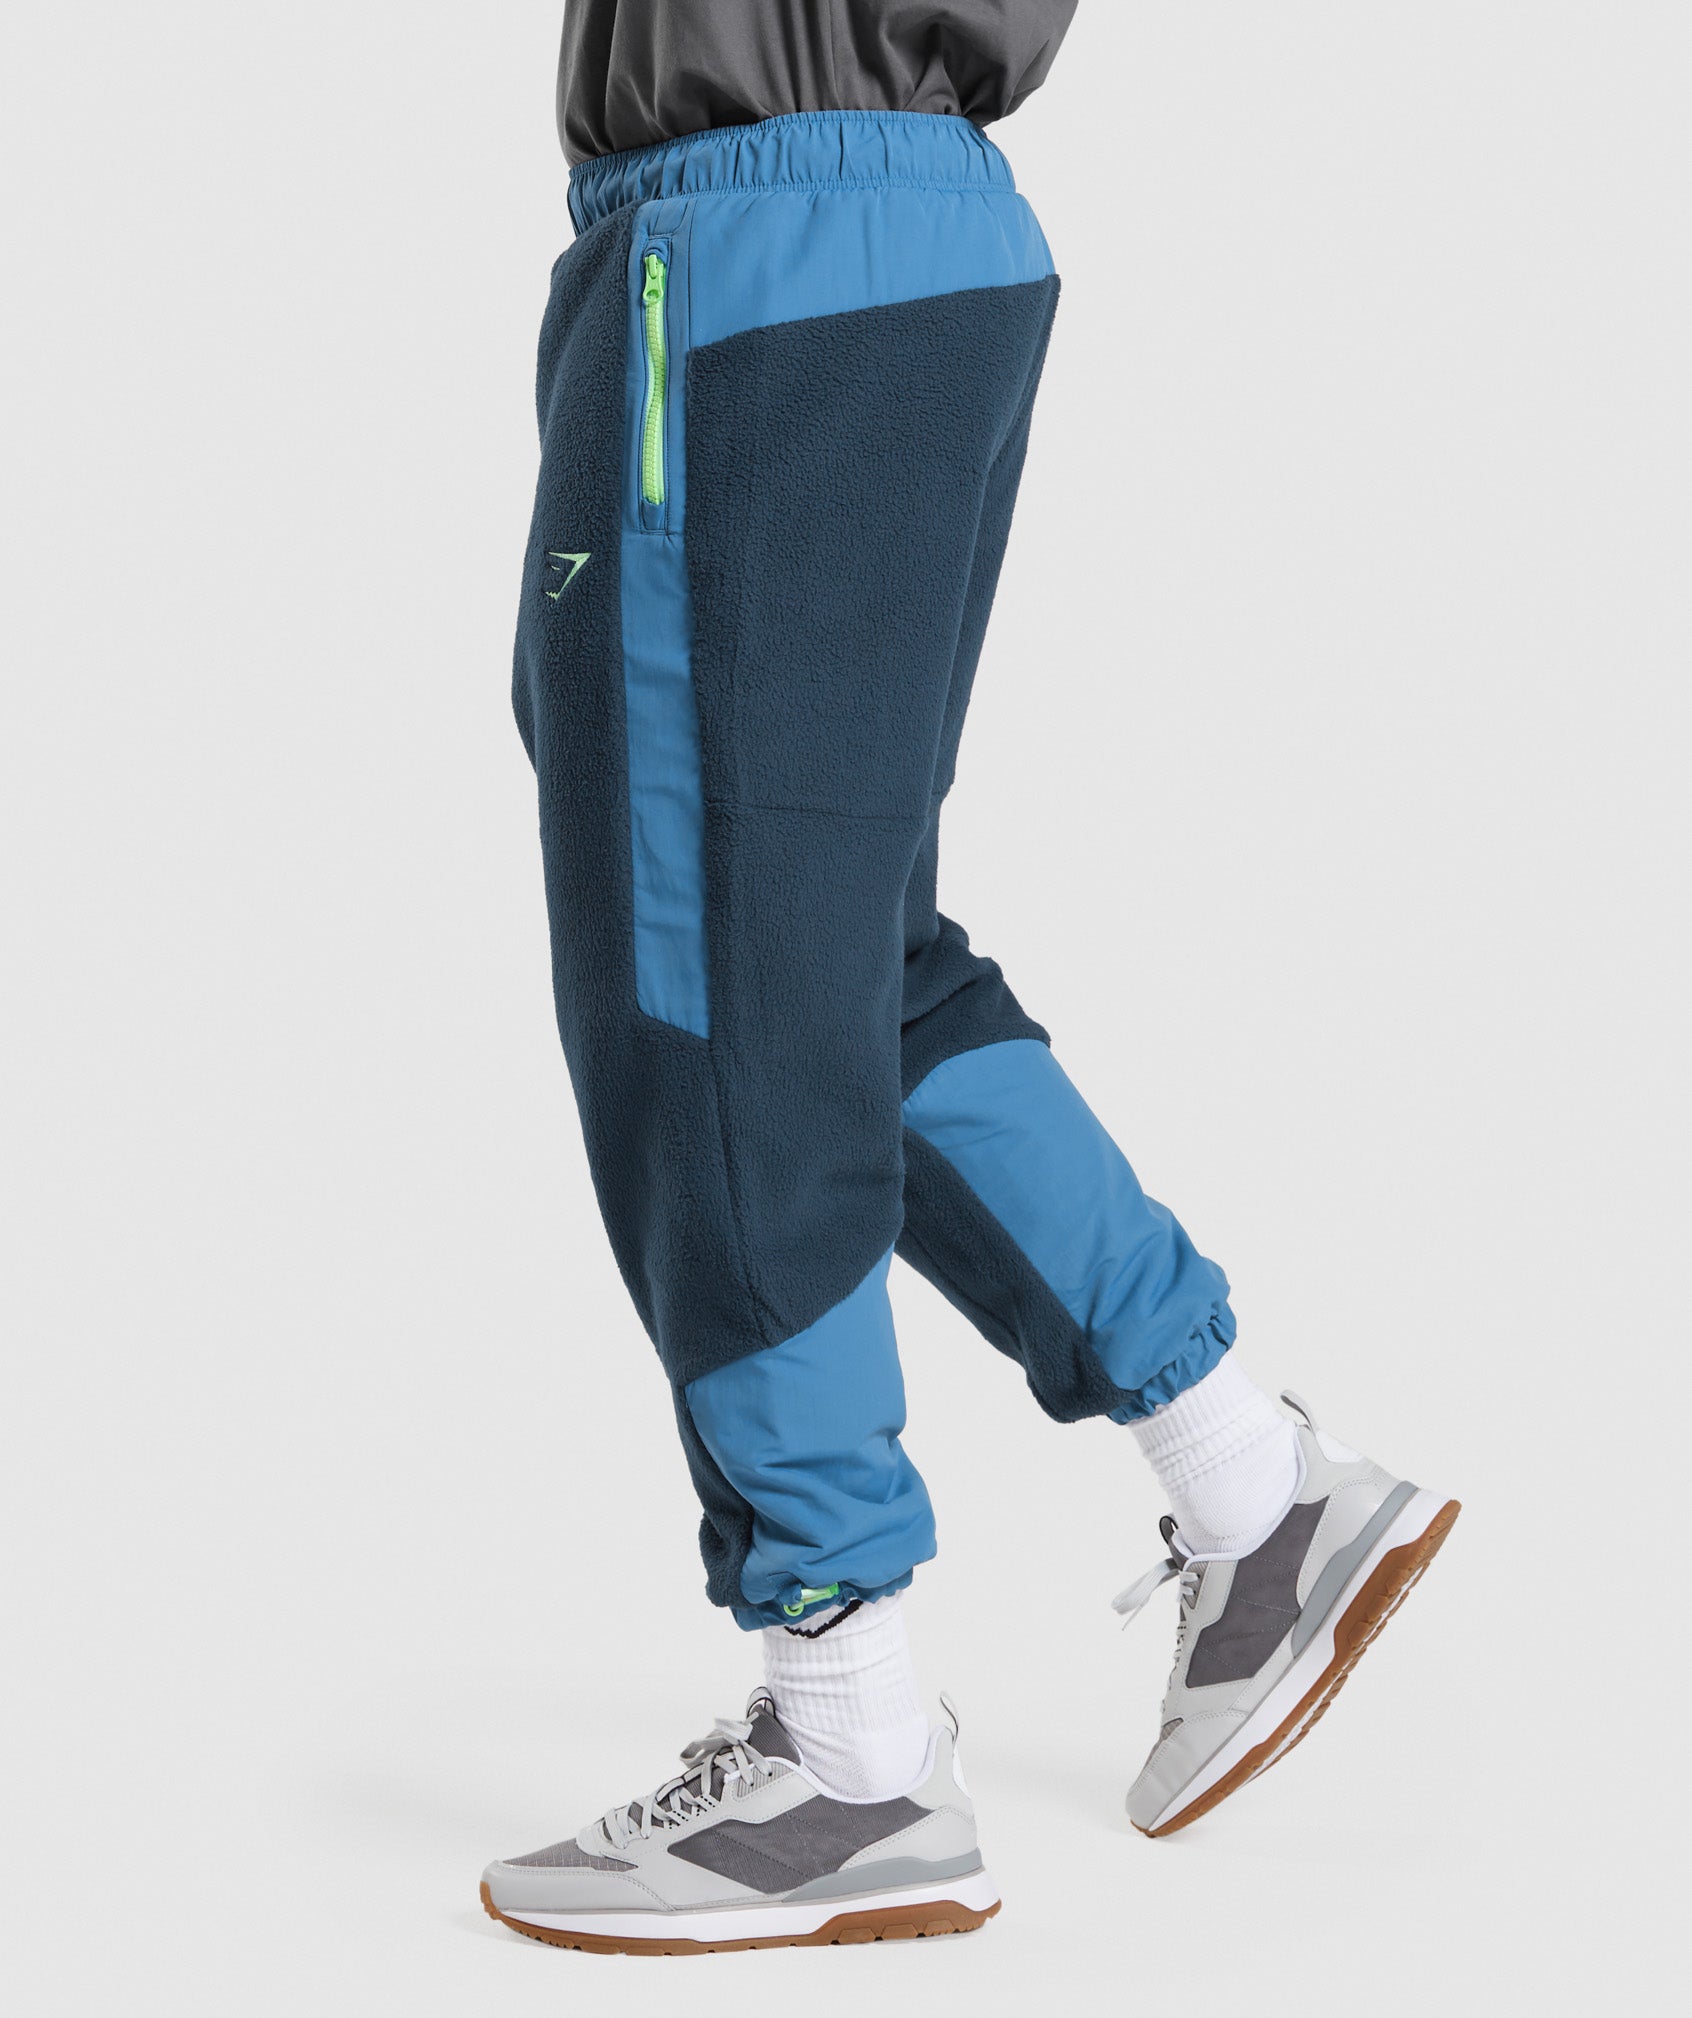 Vibes Joggers in Navy/Lakeside Blue - view 3